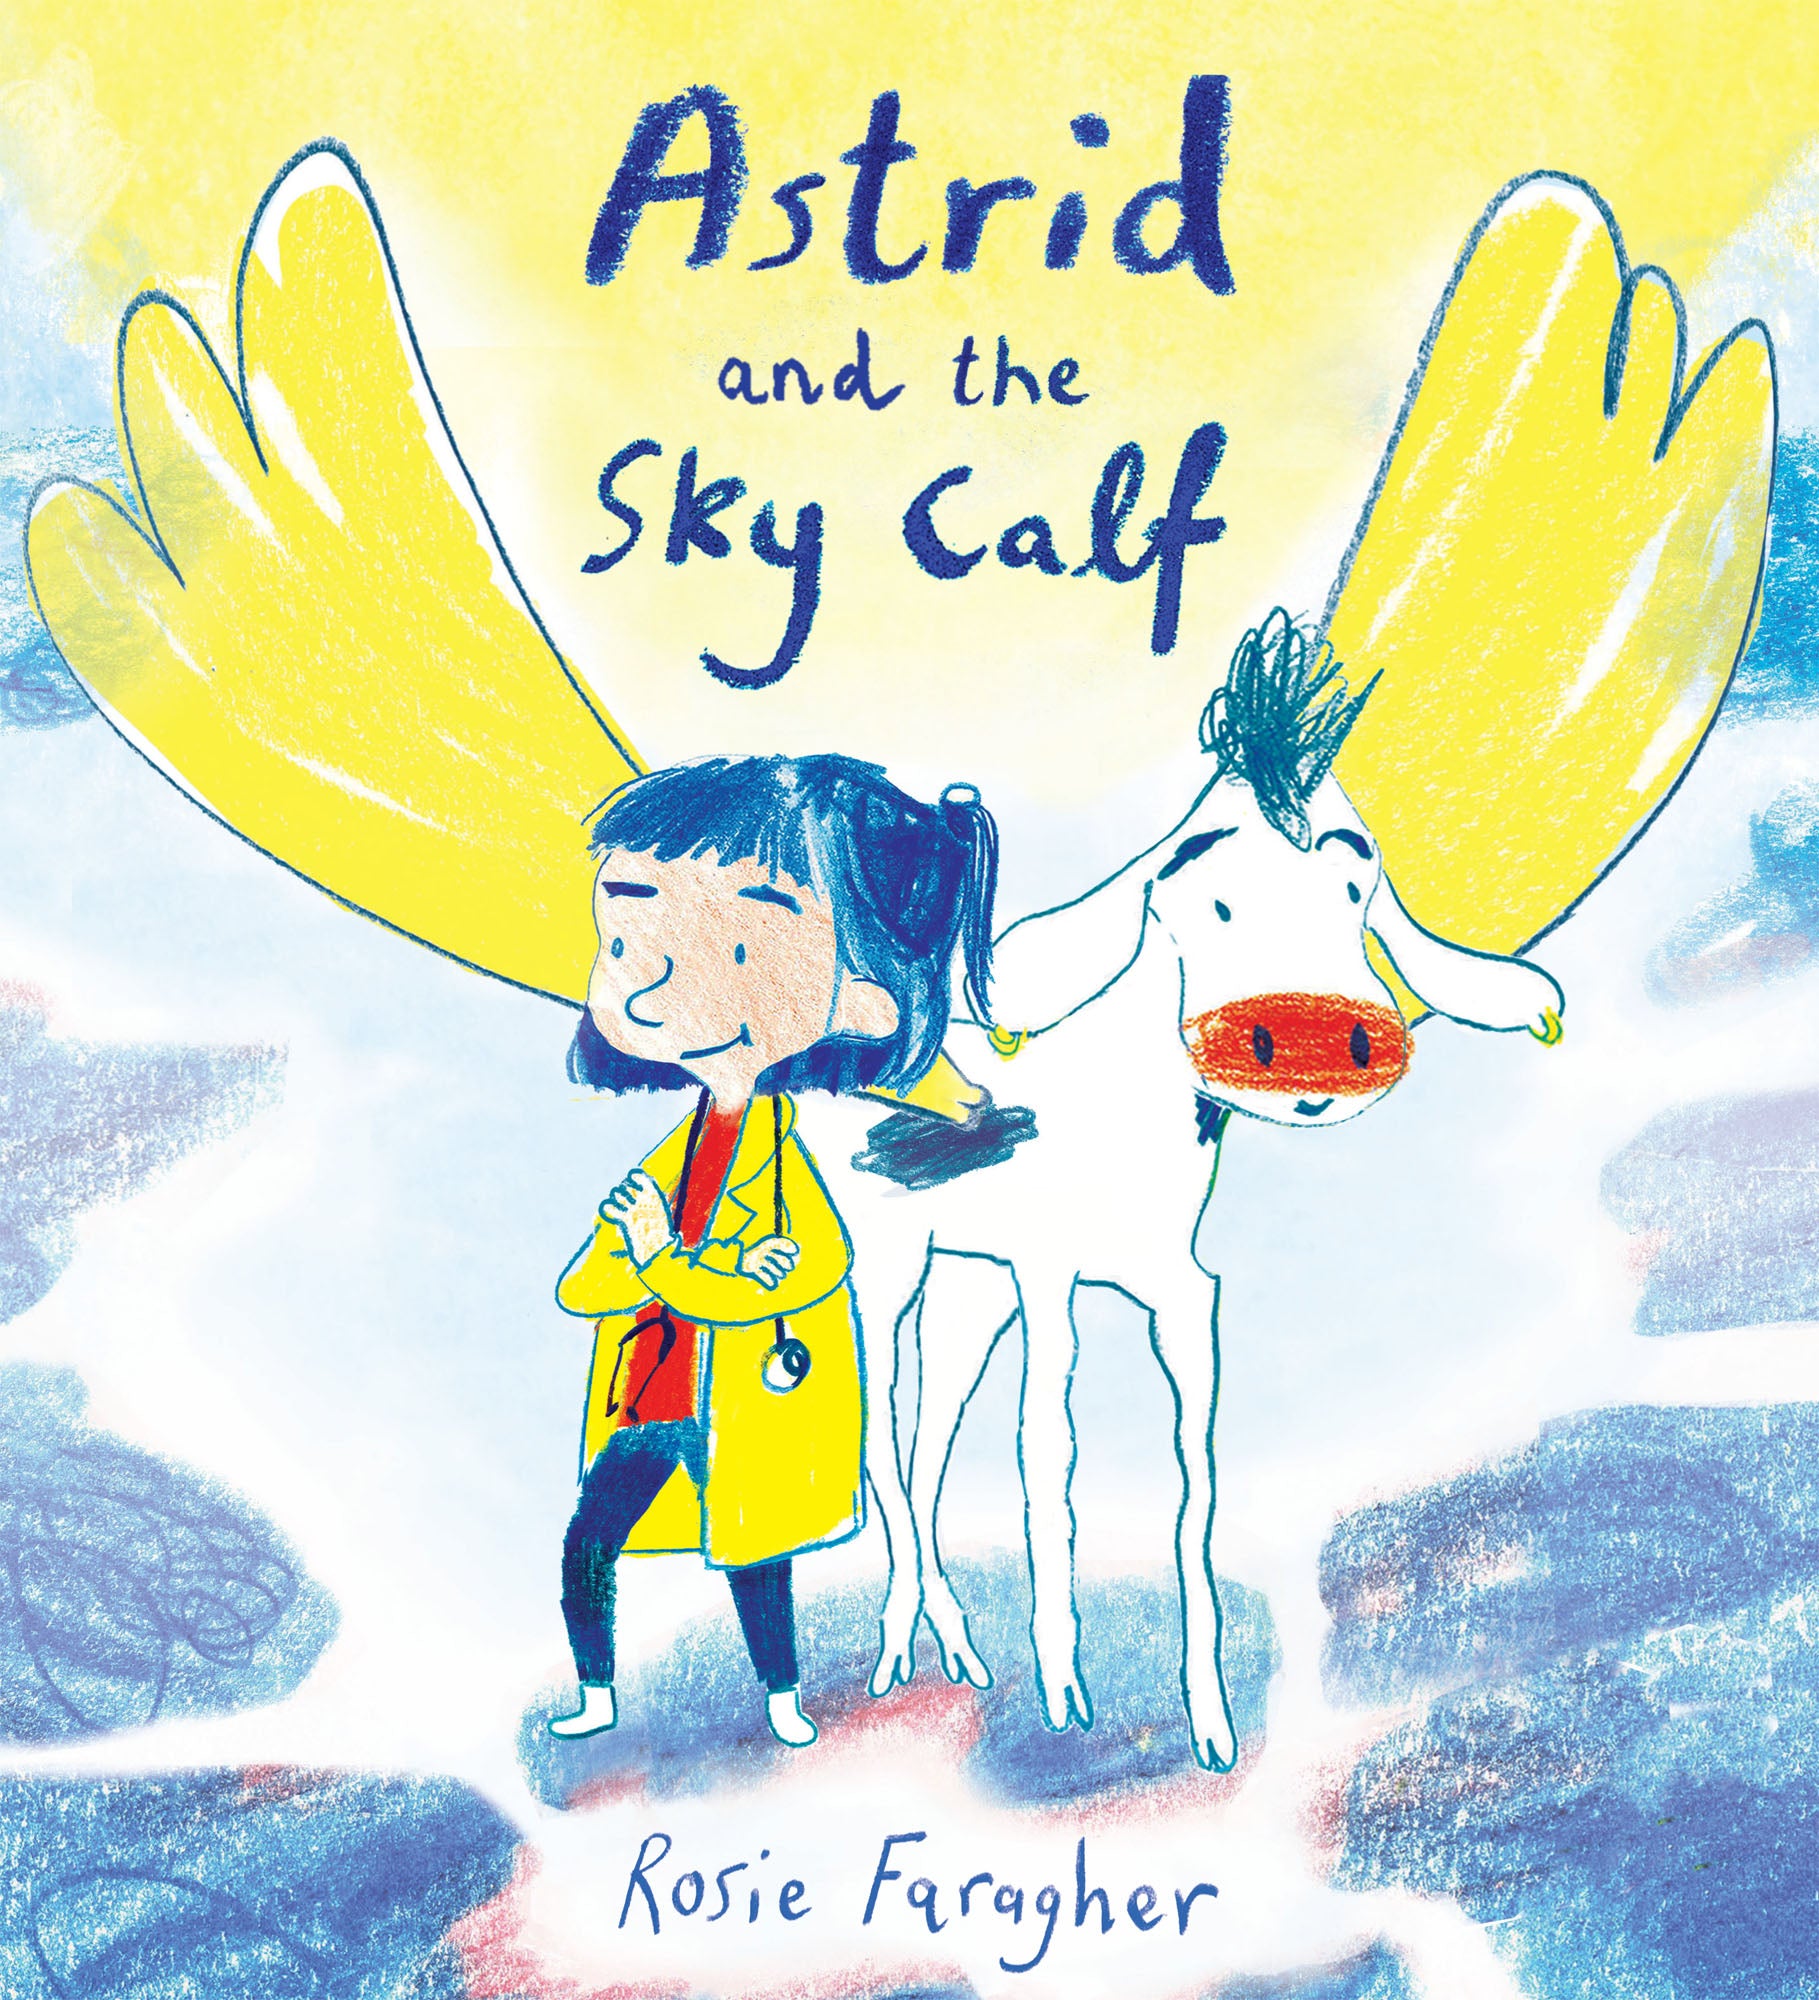 Astrid and the Sky Calf